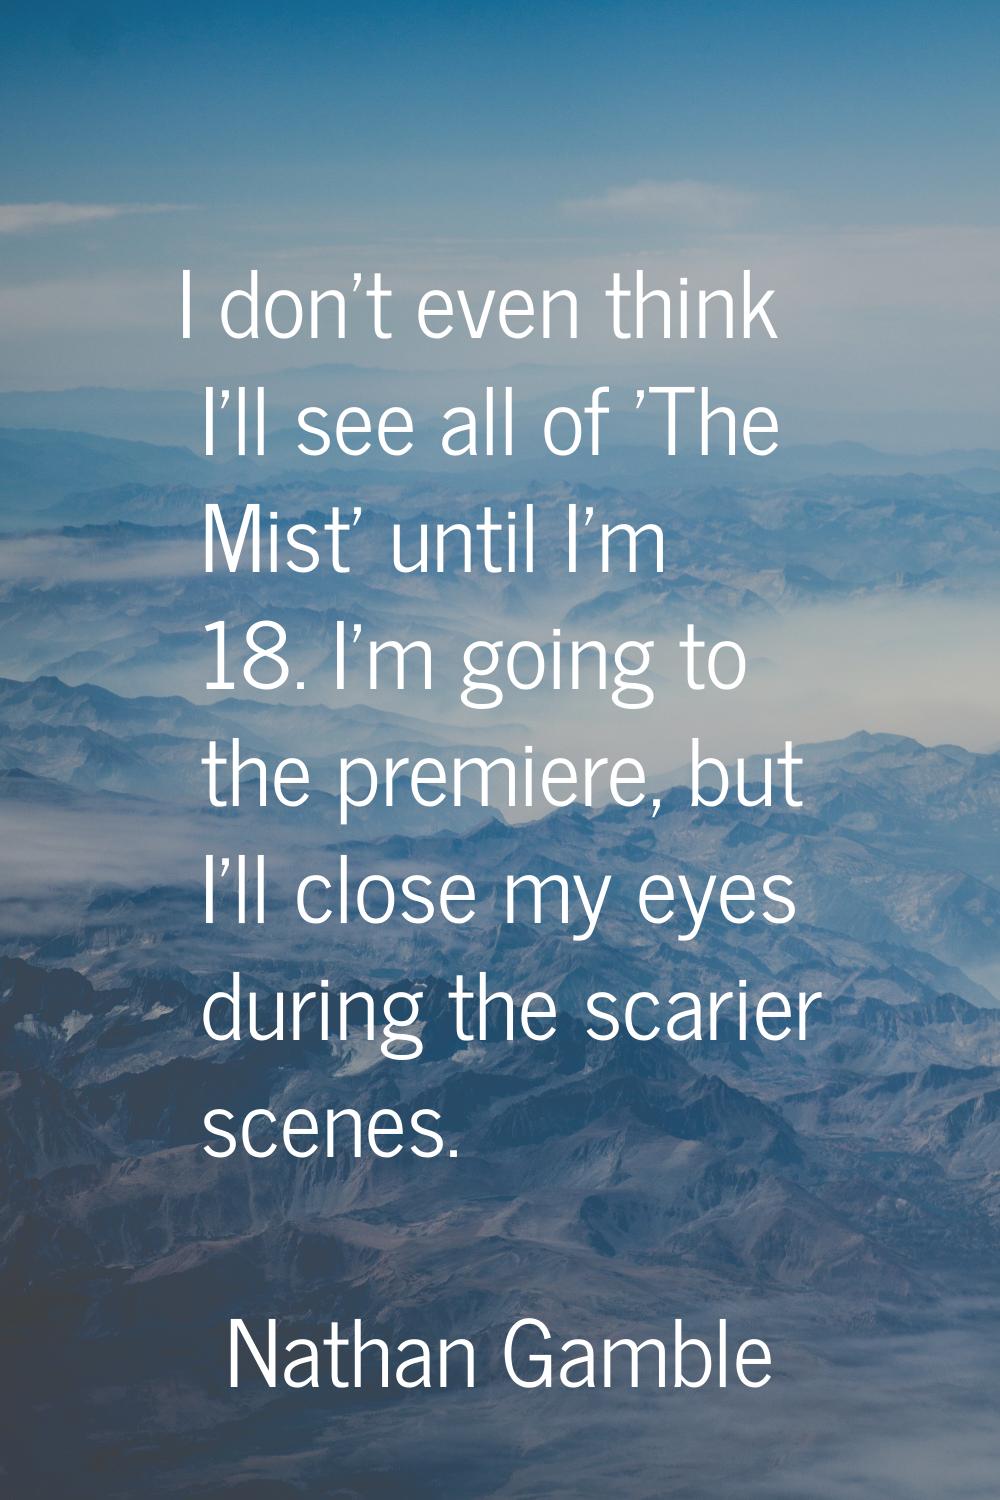 I don't even think I'll see all of 'The Mist' until I'm 18. I'm going to the premiere, but I'll clo